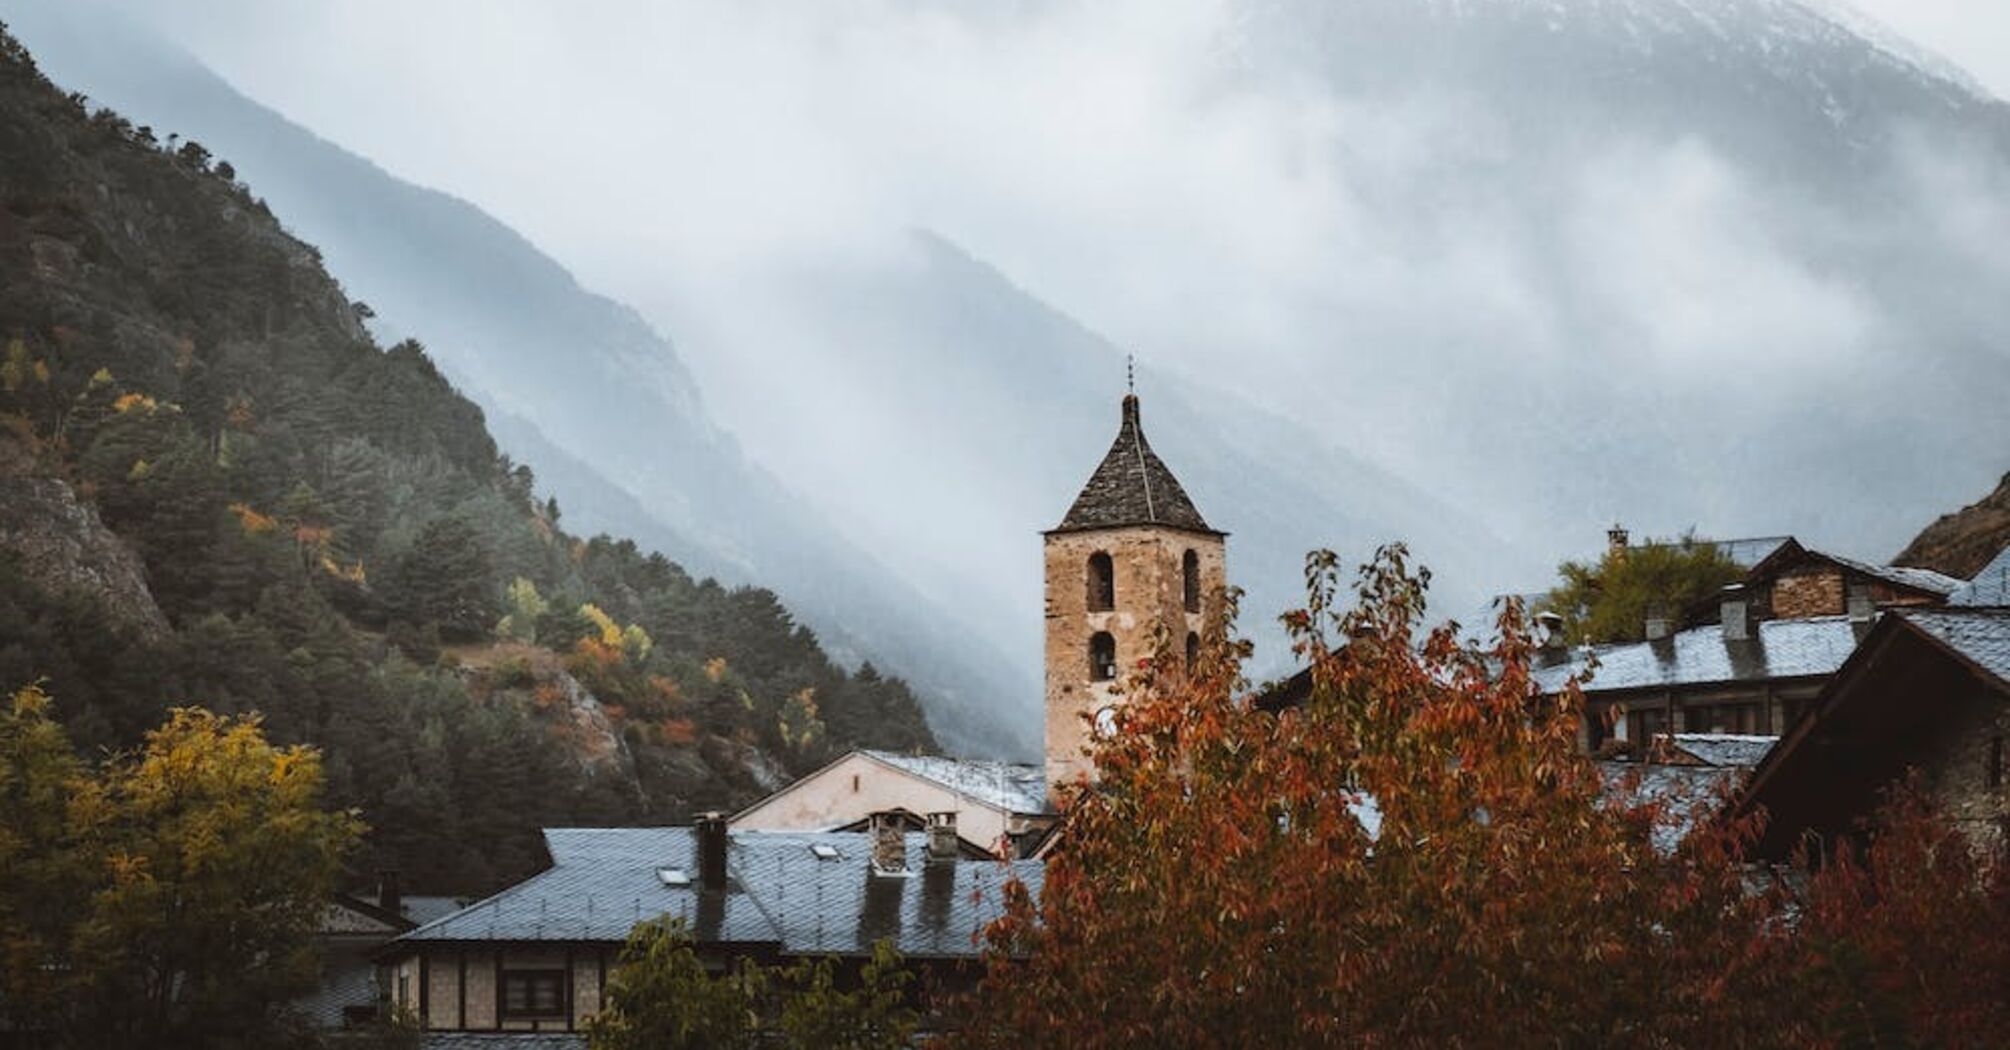 Mountain views, waterfalls and ancient architecture: 16 best European villages for traveling in 2023